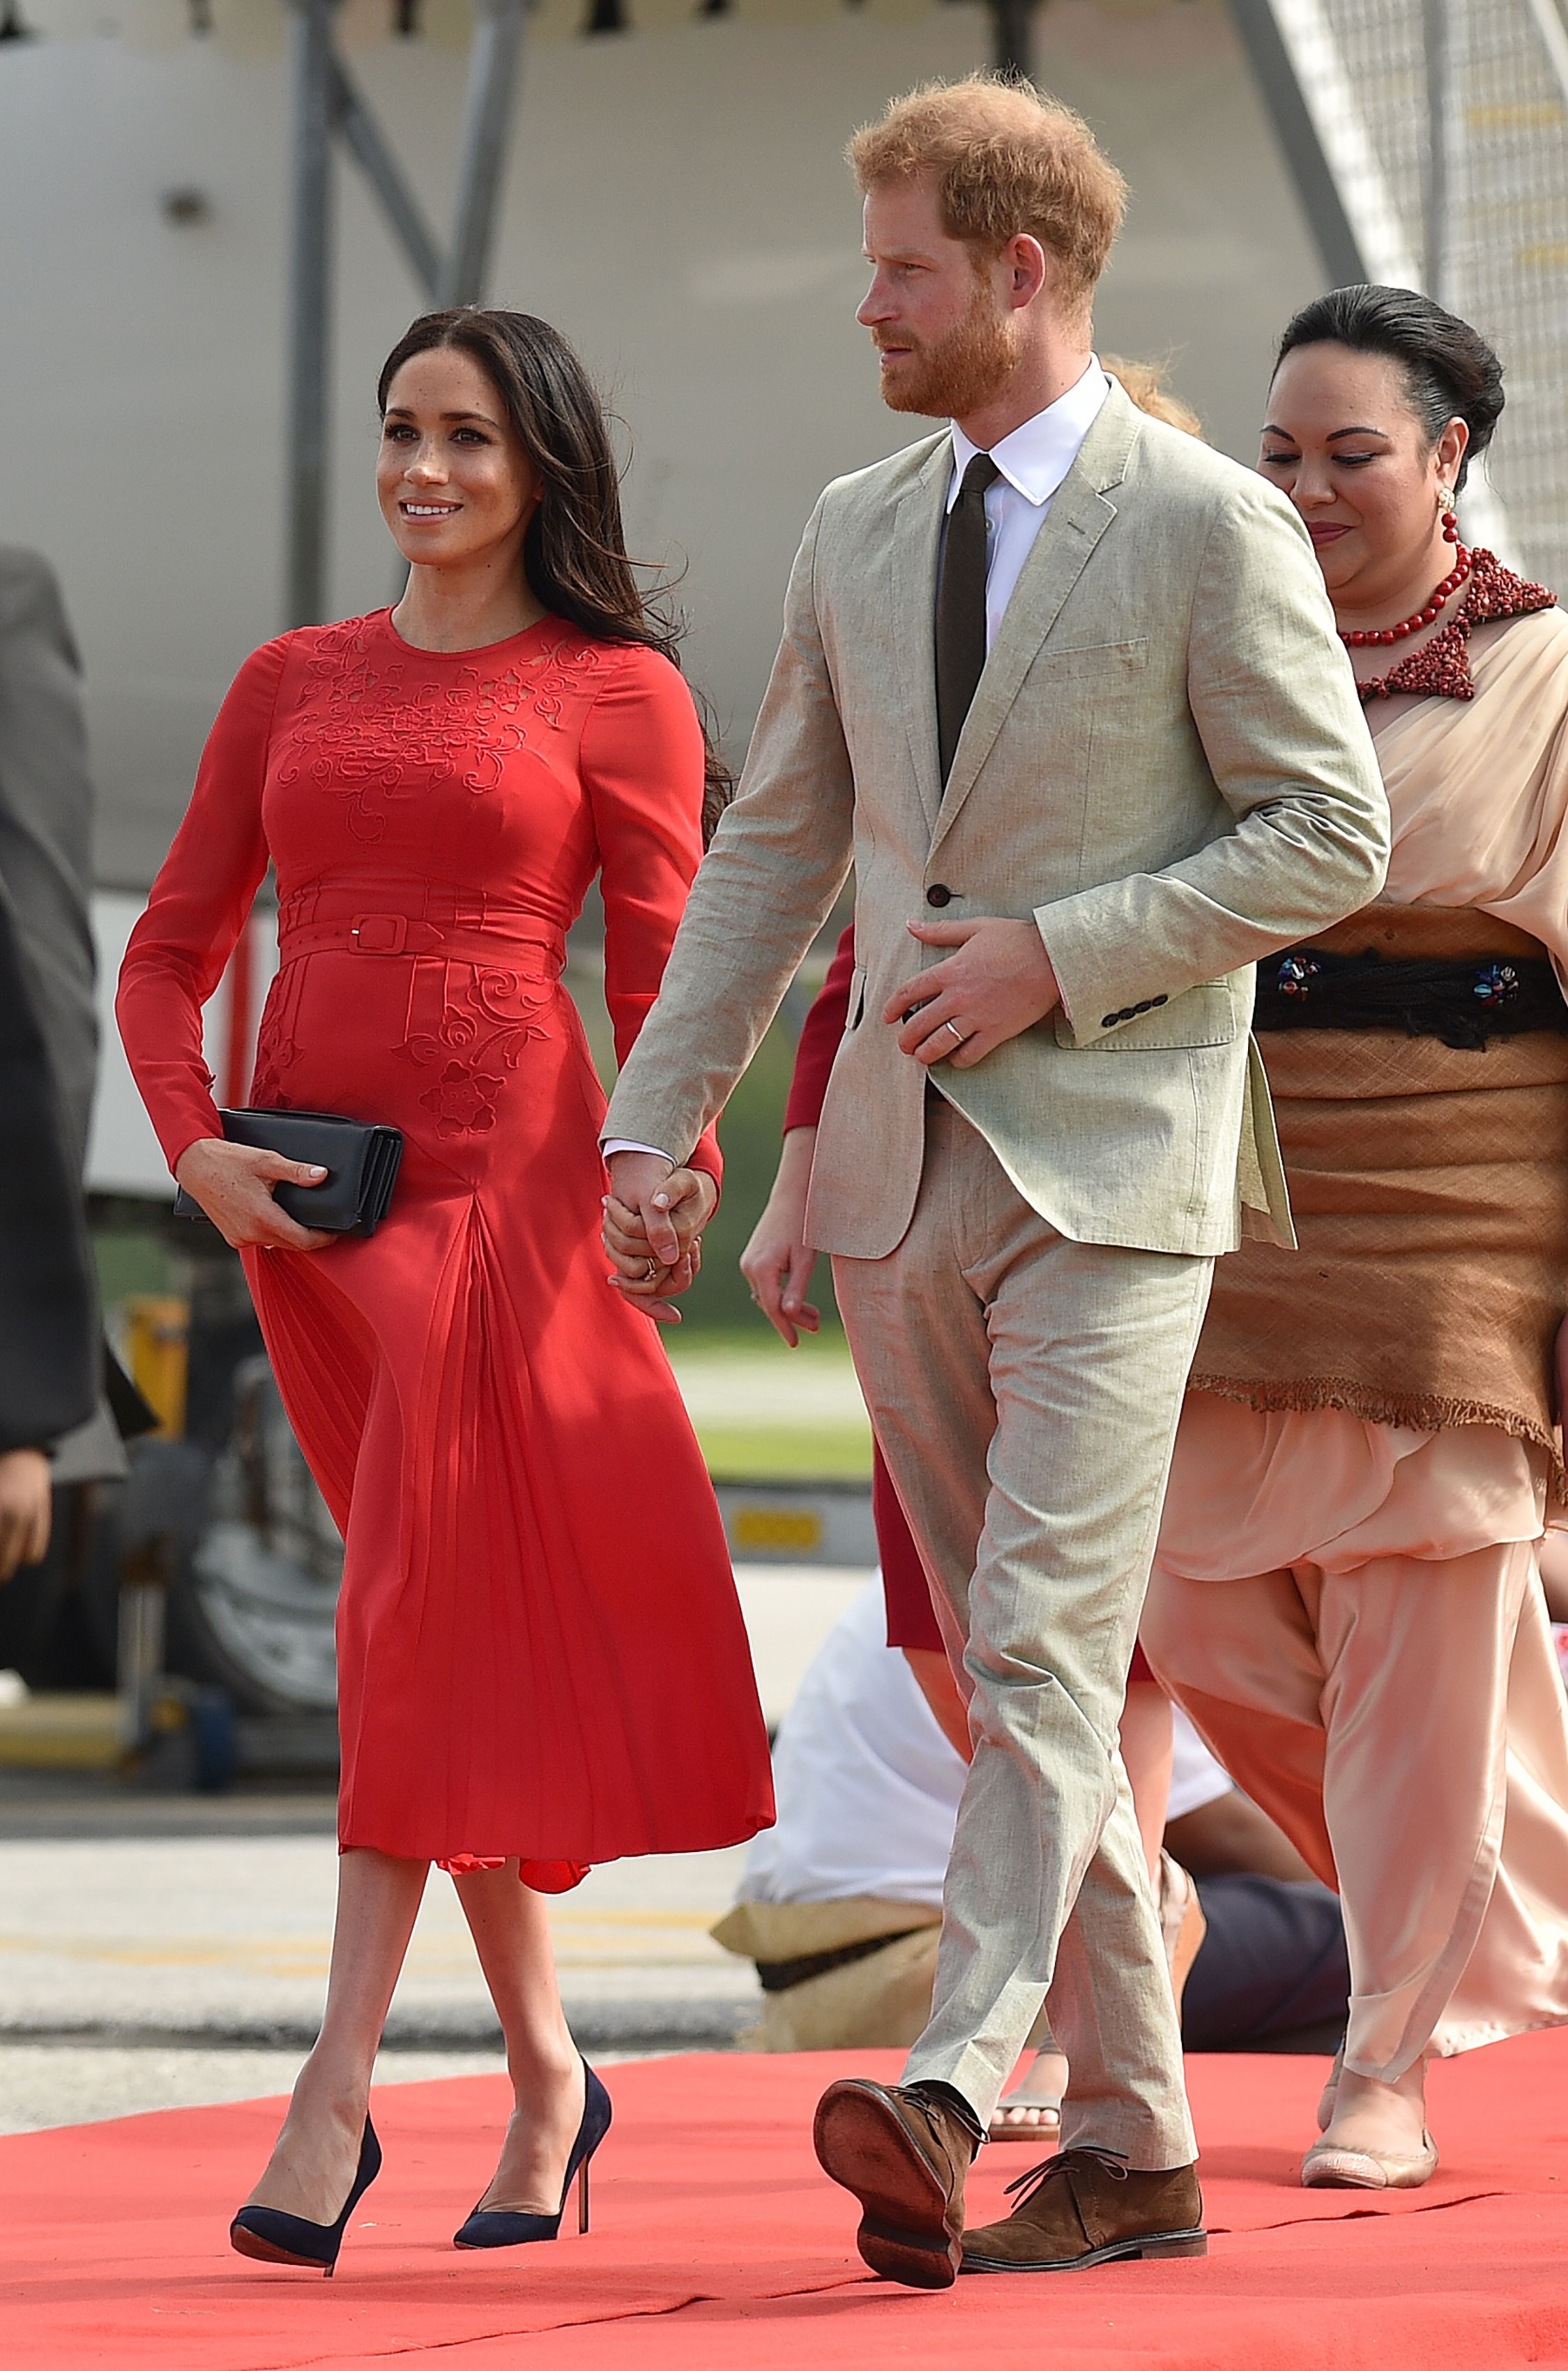 Britain's Prince Harry and his wife Meghan, Duchess of Sussex arrive at Fua'amotu airport in Tonga on October 25, 2018 | Source: Getty Images